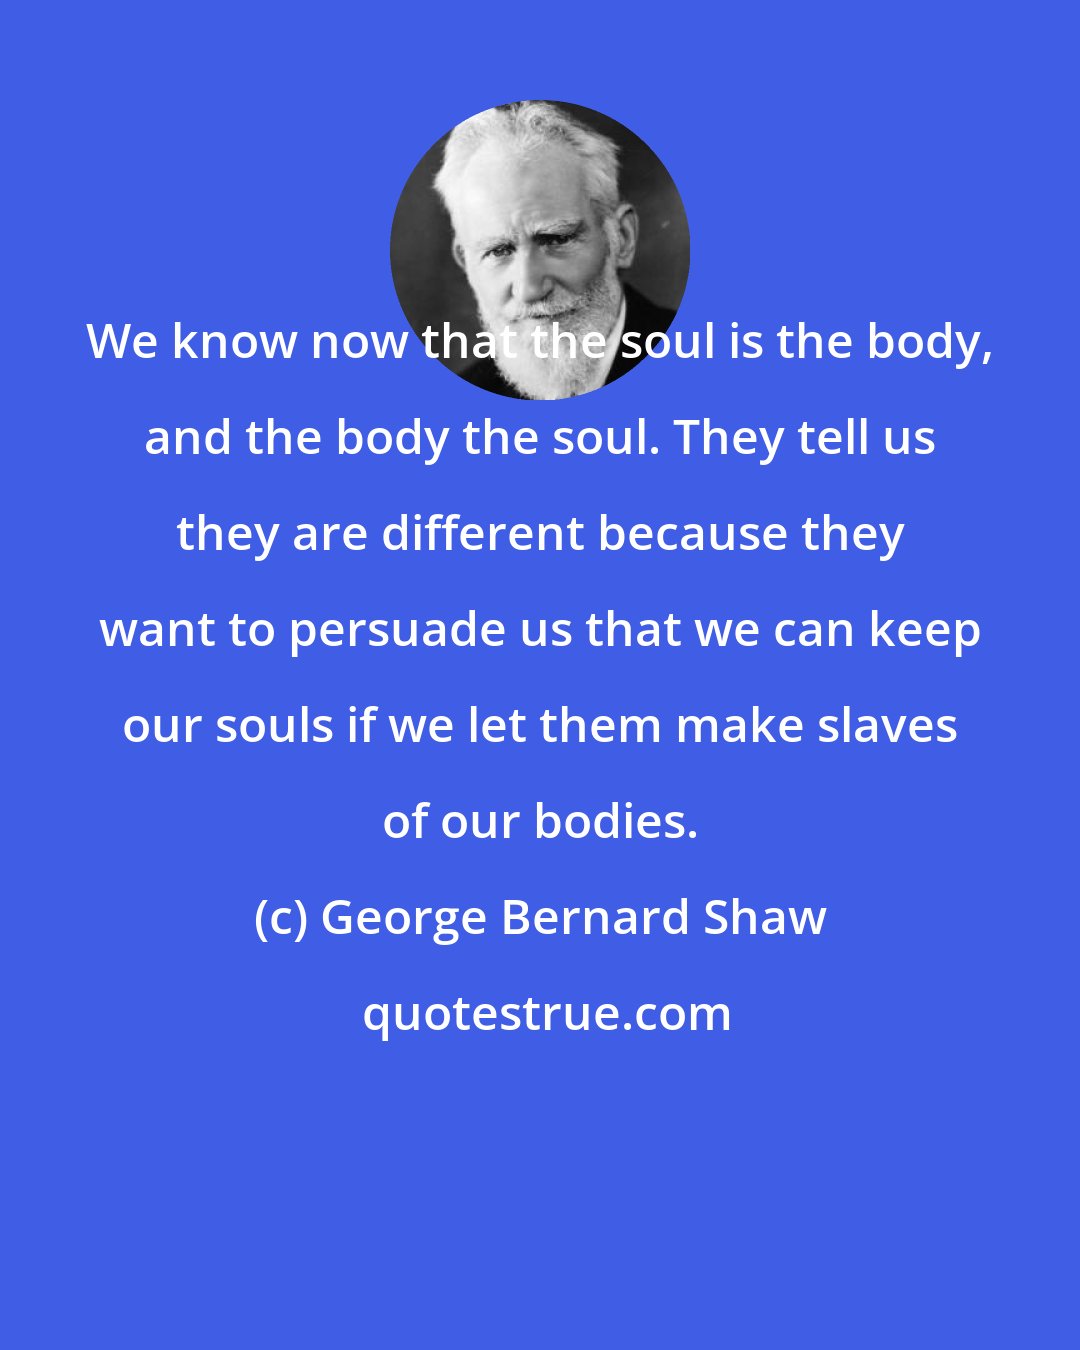 George Bernard Shaw: We know now that the soul is the body, and the body the soul. They tell us they are different because they want to persuade us that we can keep our souls if we let them make slaves of our bodies.